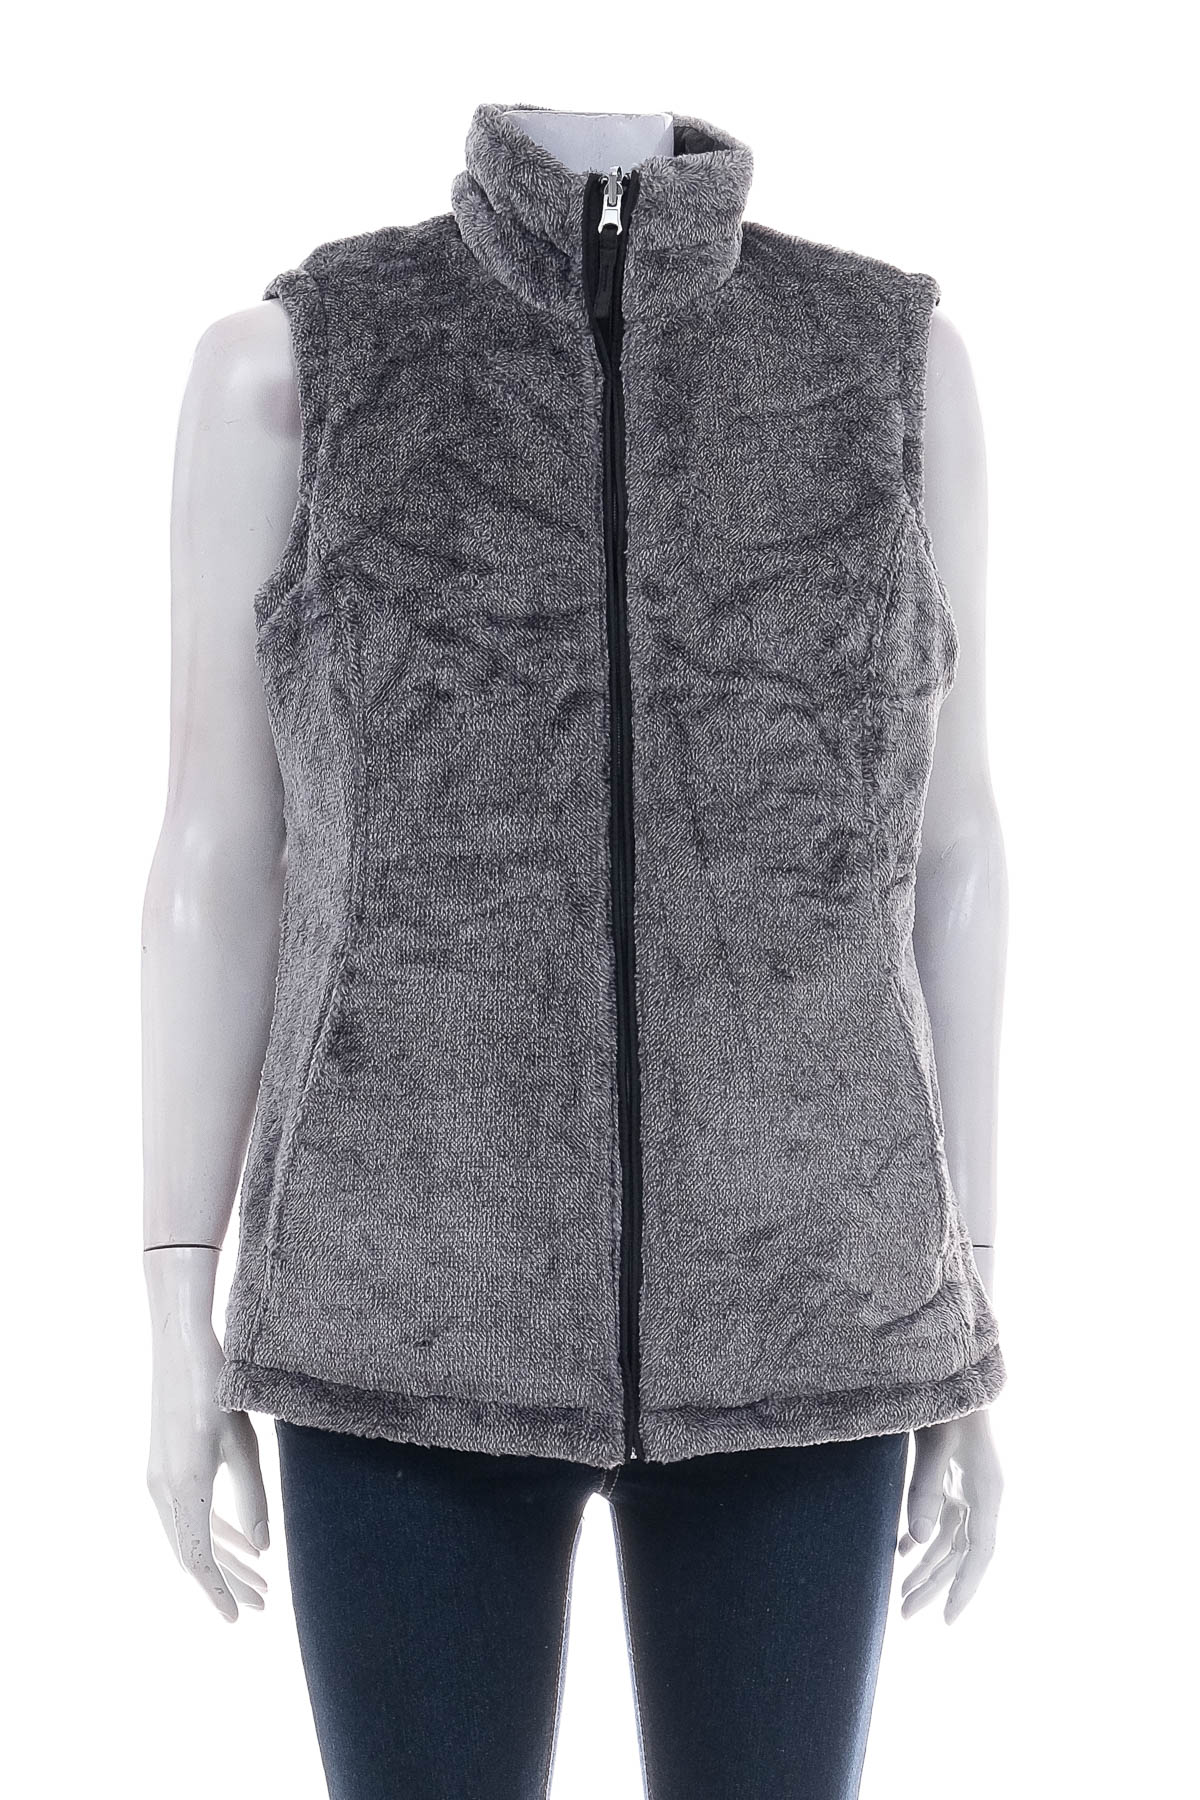 Women's reversible vest - Free Country - 1